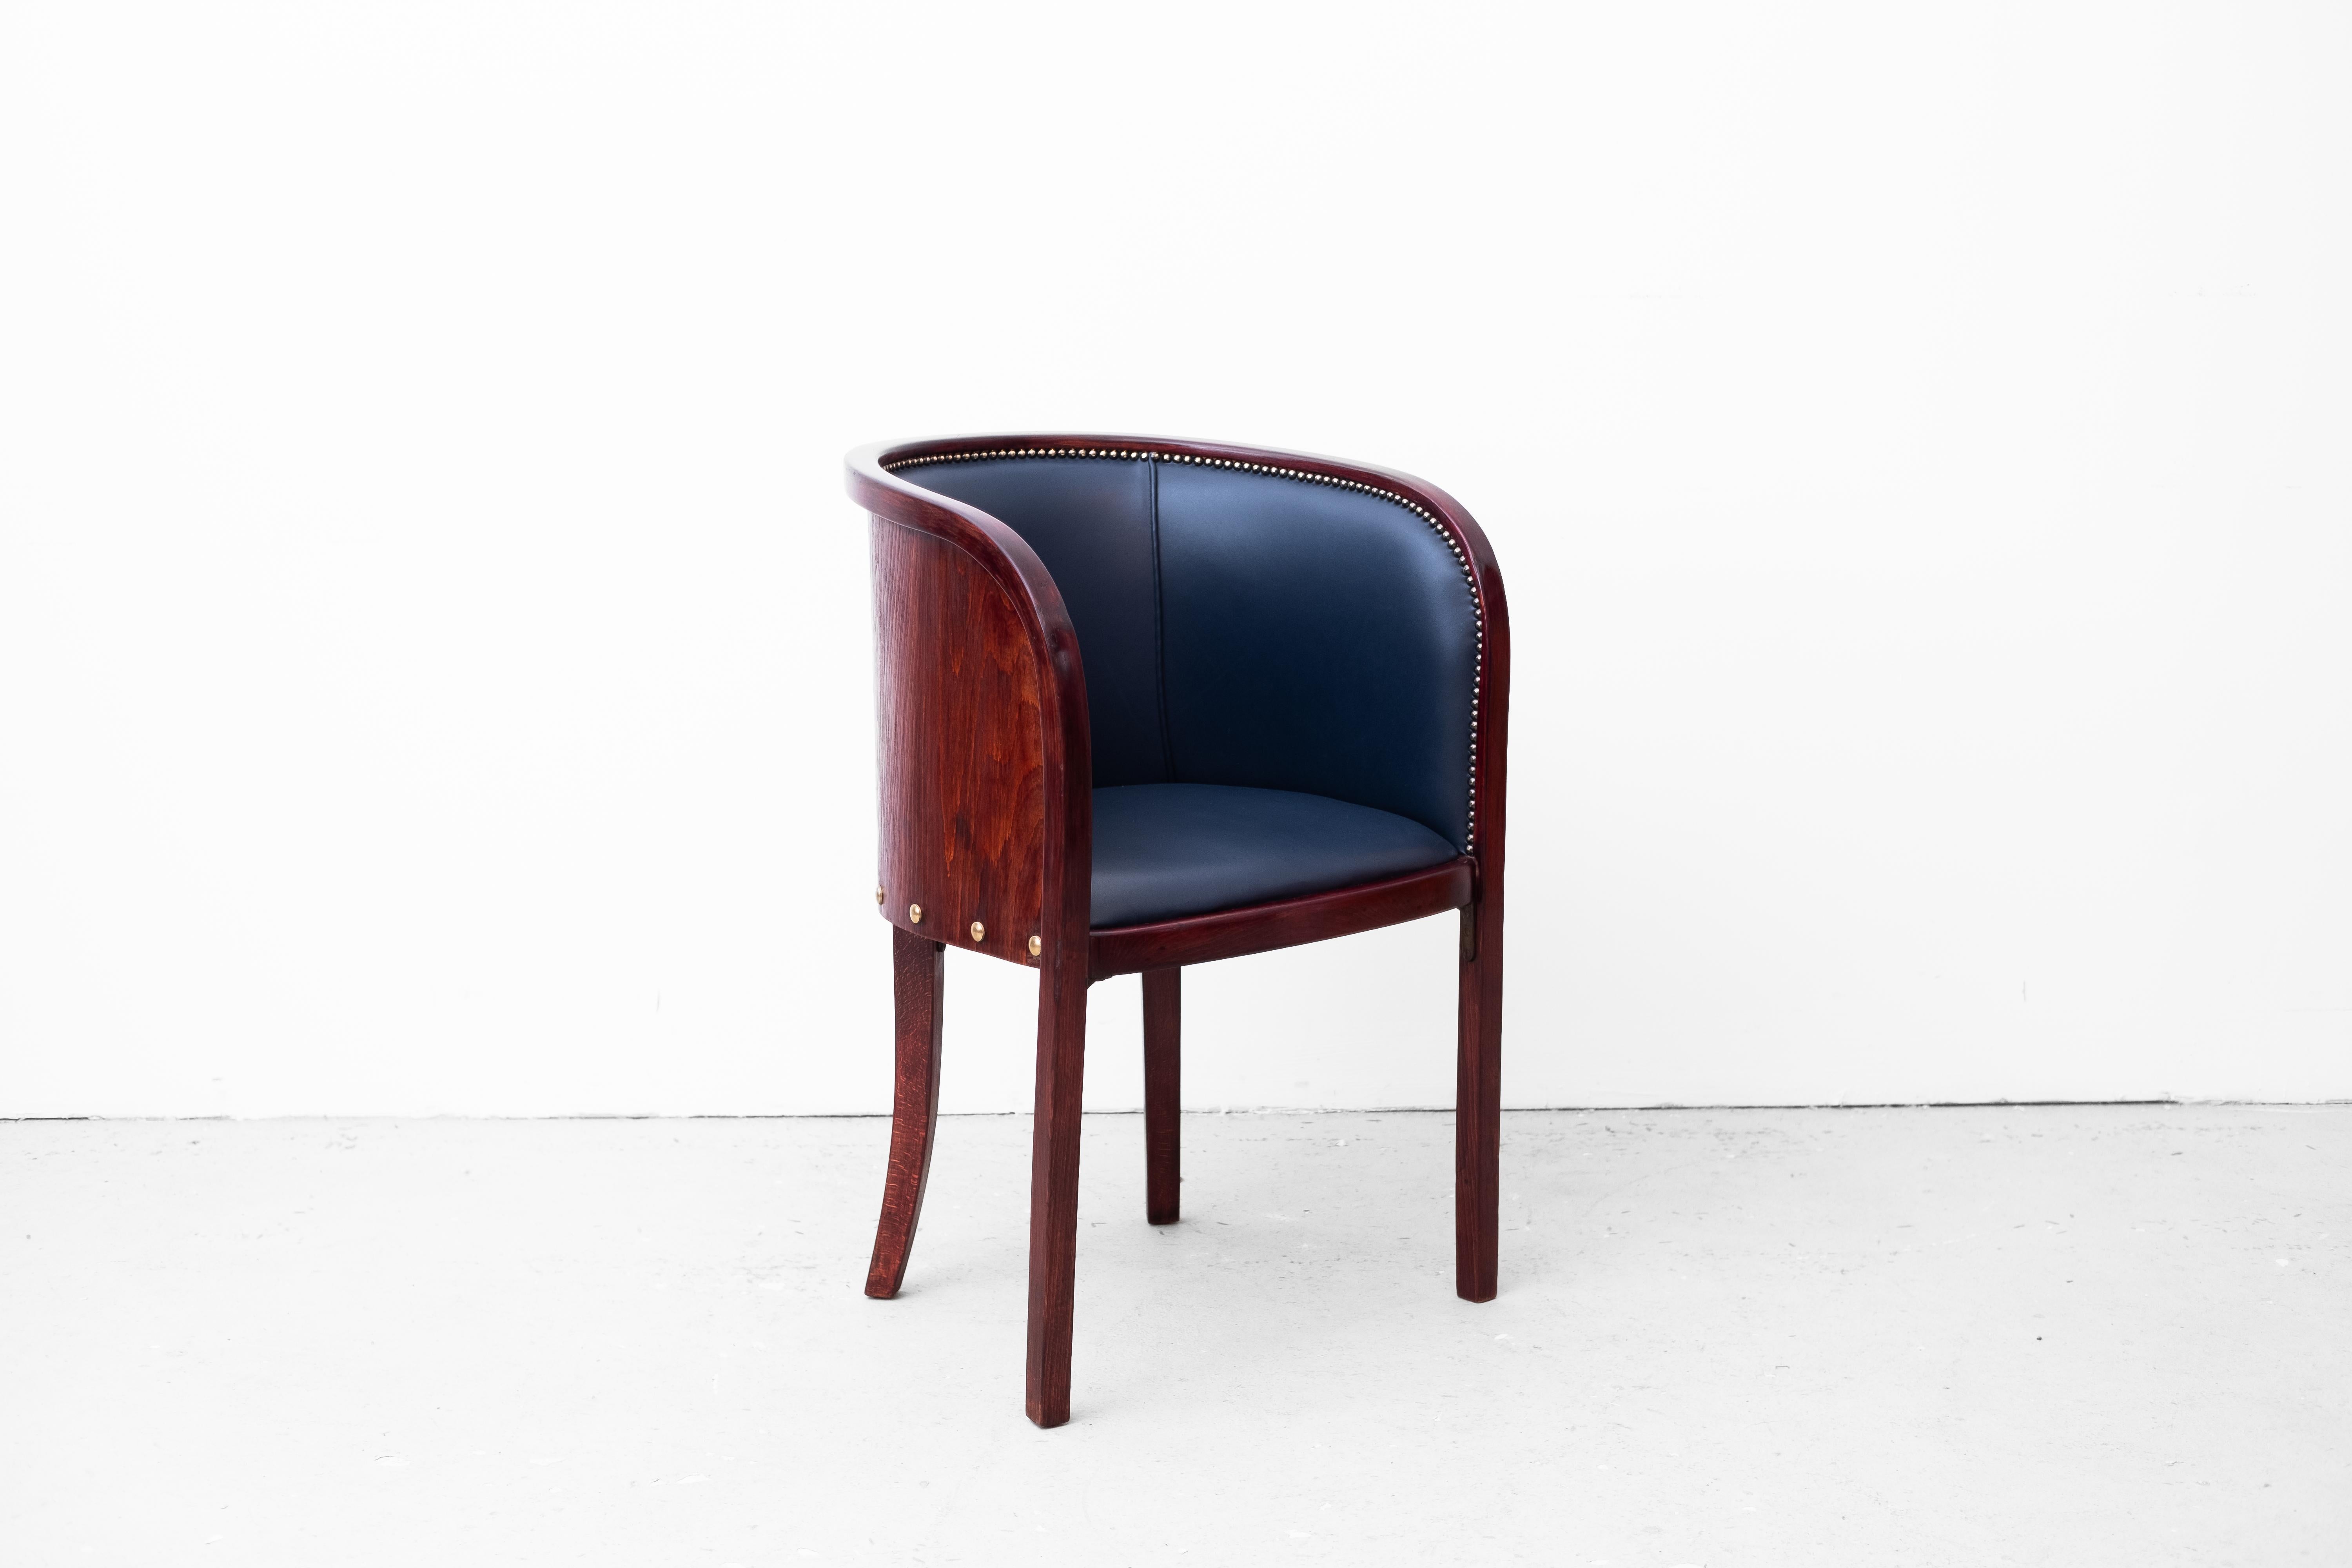 Secession Armchair by Josef Hoffmann (1914), manufactured by Thonet (1919) 9